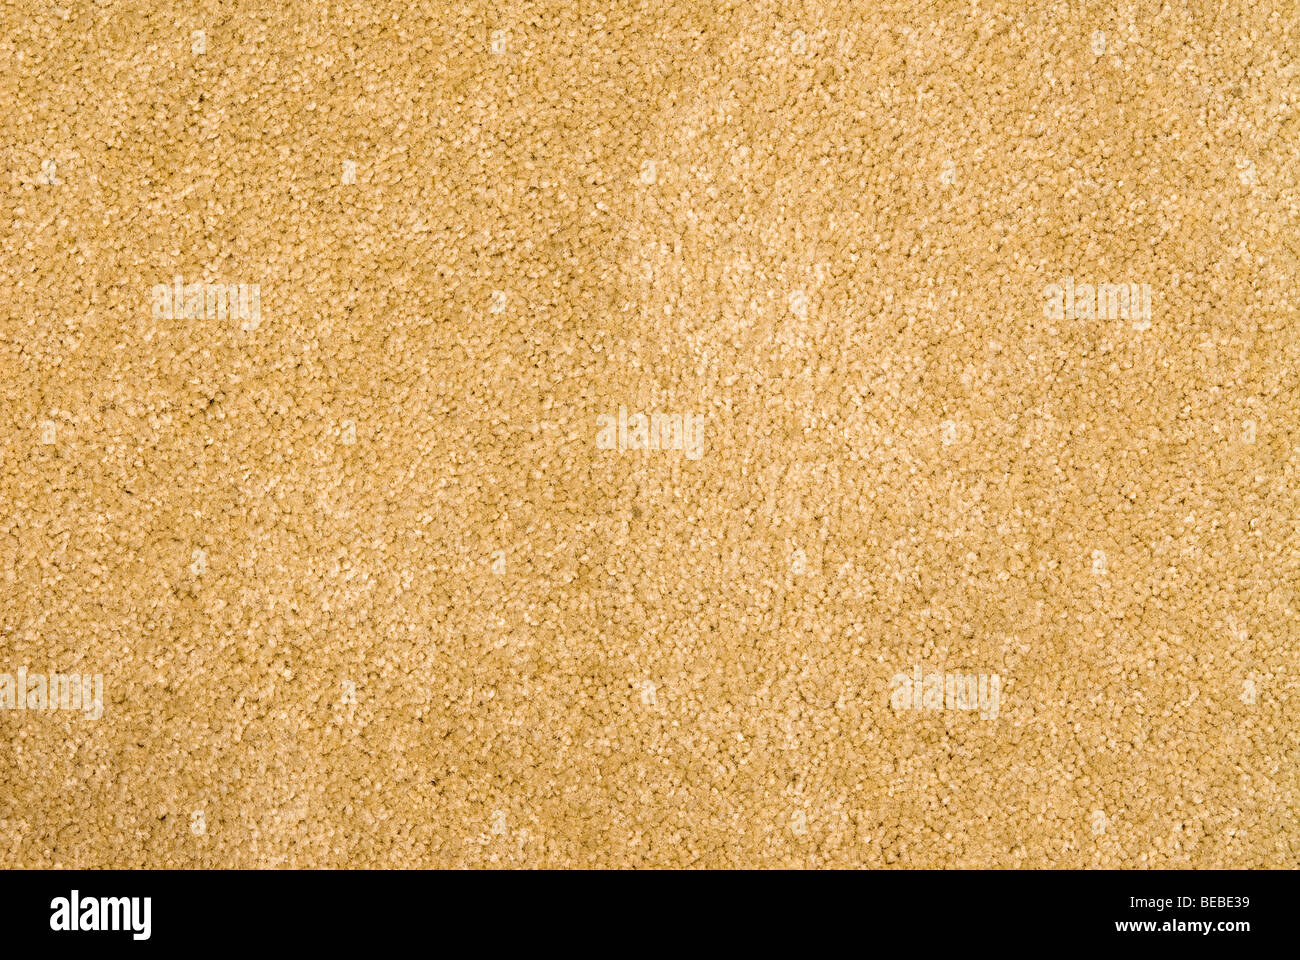 Brand new shag carpet. Can be used as a background for any cleaning or installation inference. Stock Photo